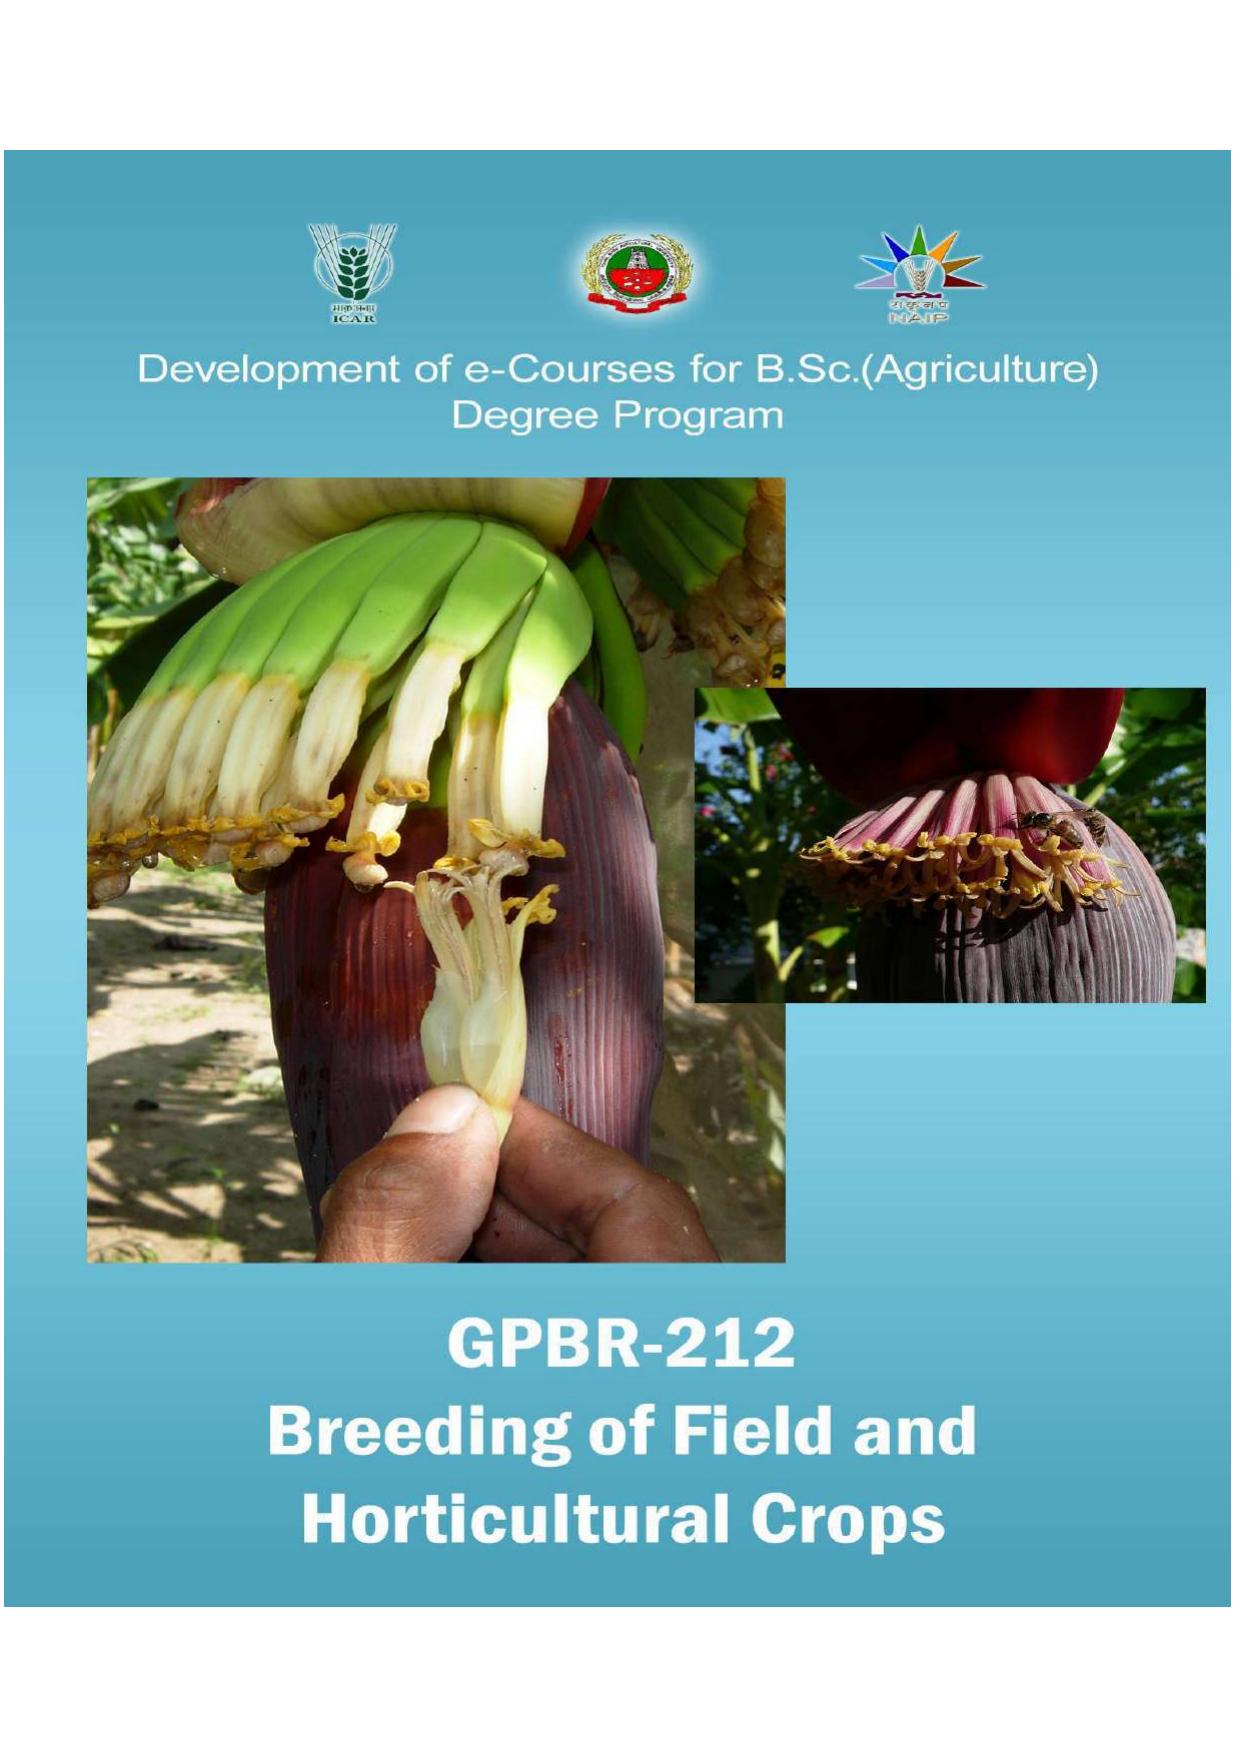 BREEDING OF FIELD & HORTICULTURAL CROPS 2016